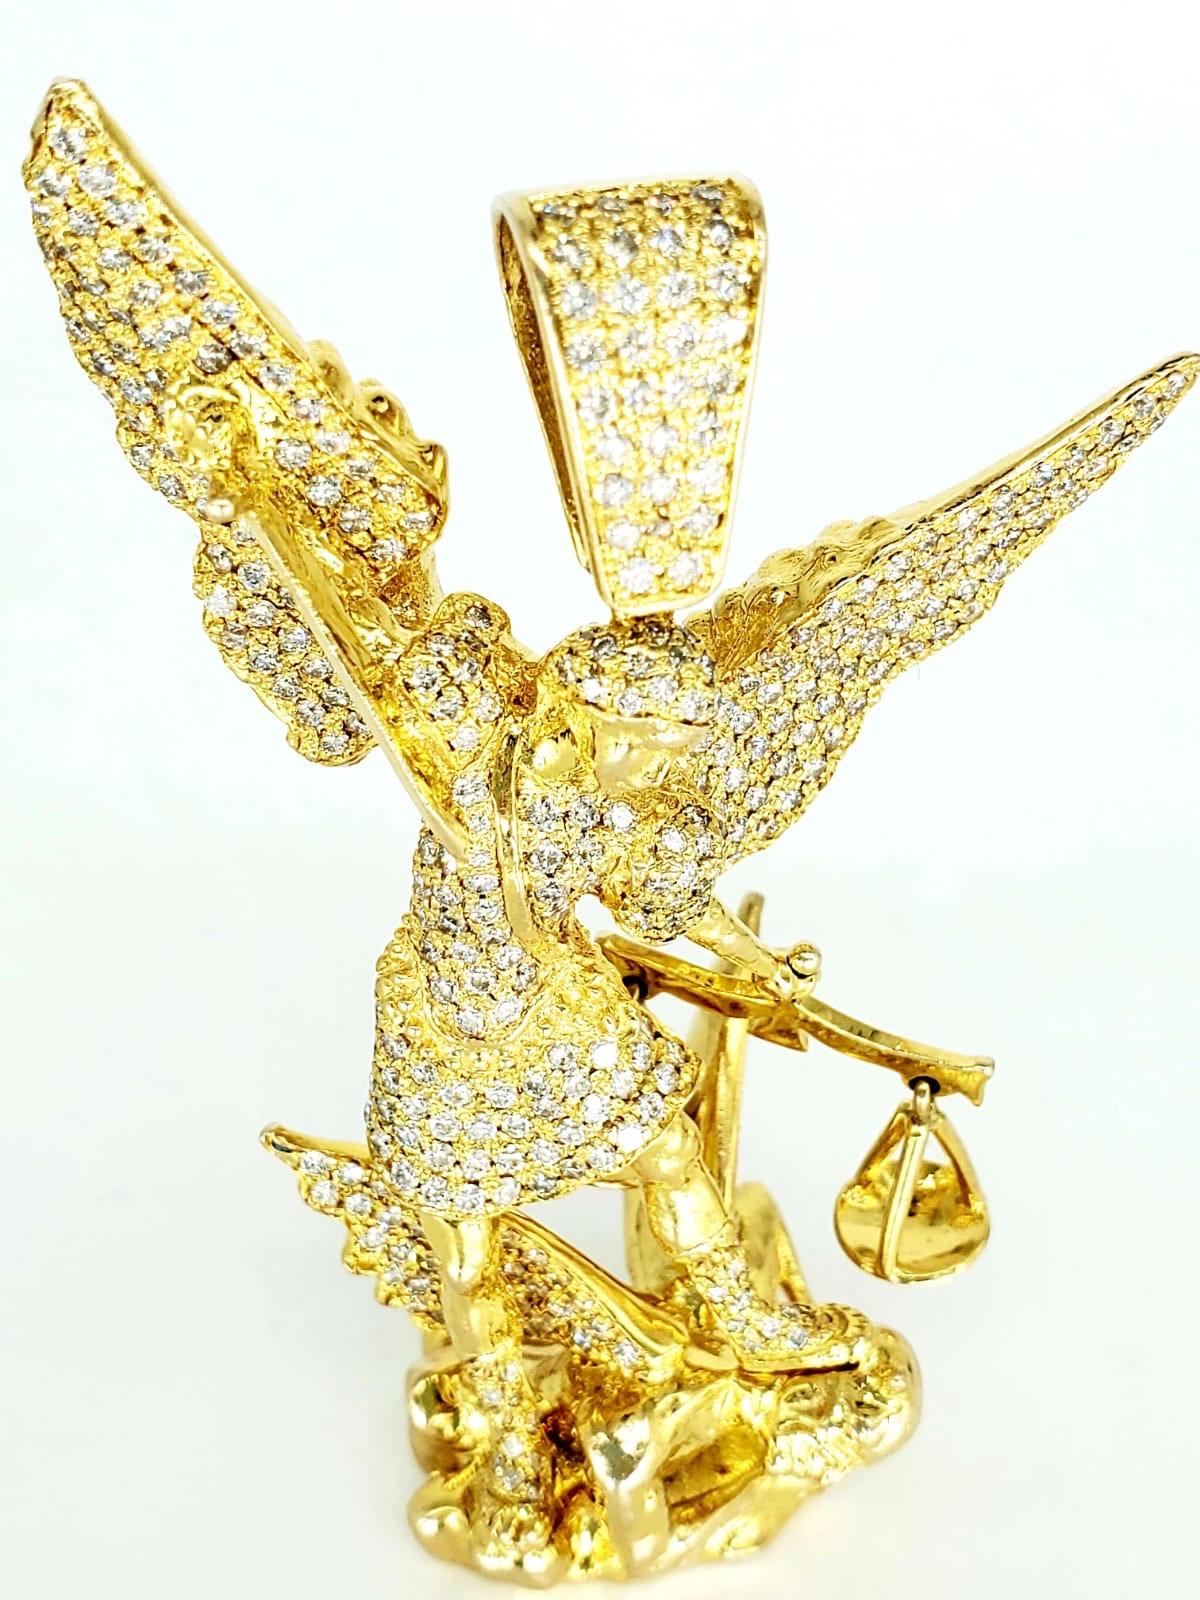 Fully iced out Custom 17 Carat Diamonds Saint Michael 14k Gold Pendant. The pendant measures 3 inches tall by 2 inches wide. Approx 17 carat of diamonds. The pendant is very heavy weighting 94.3 grams. There are approx 340 diamonds in this pendant. 